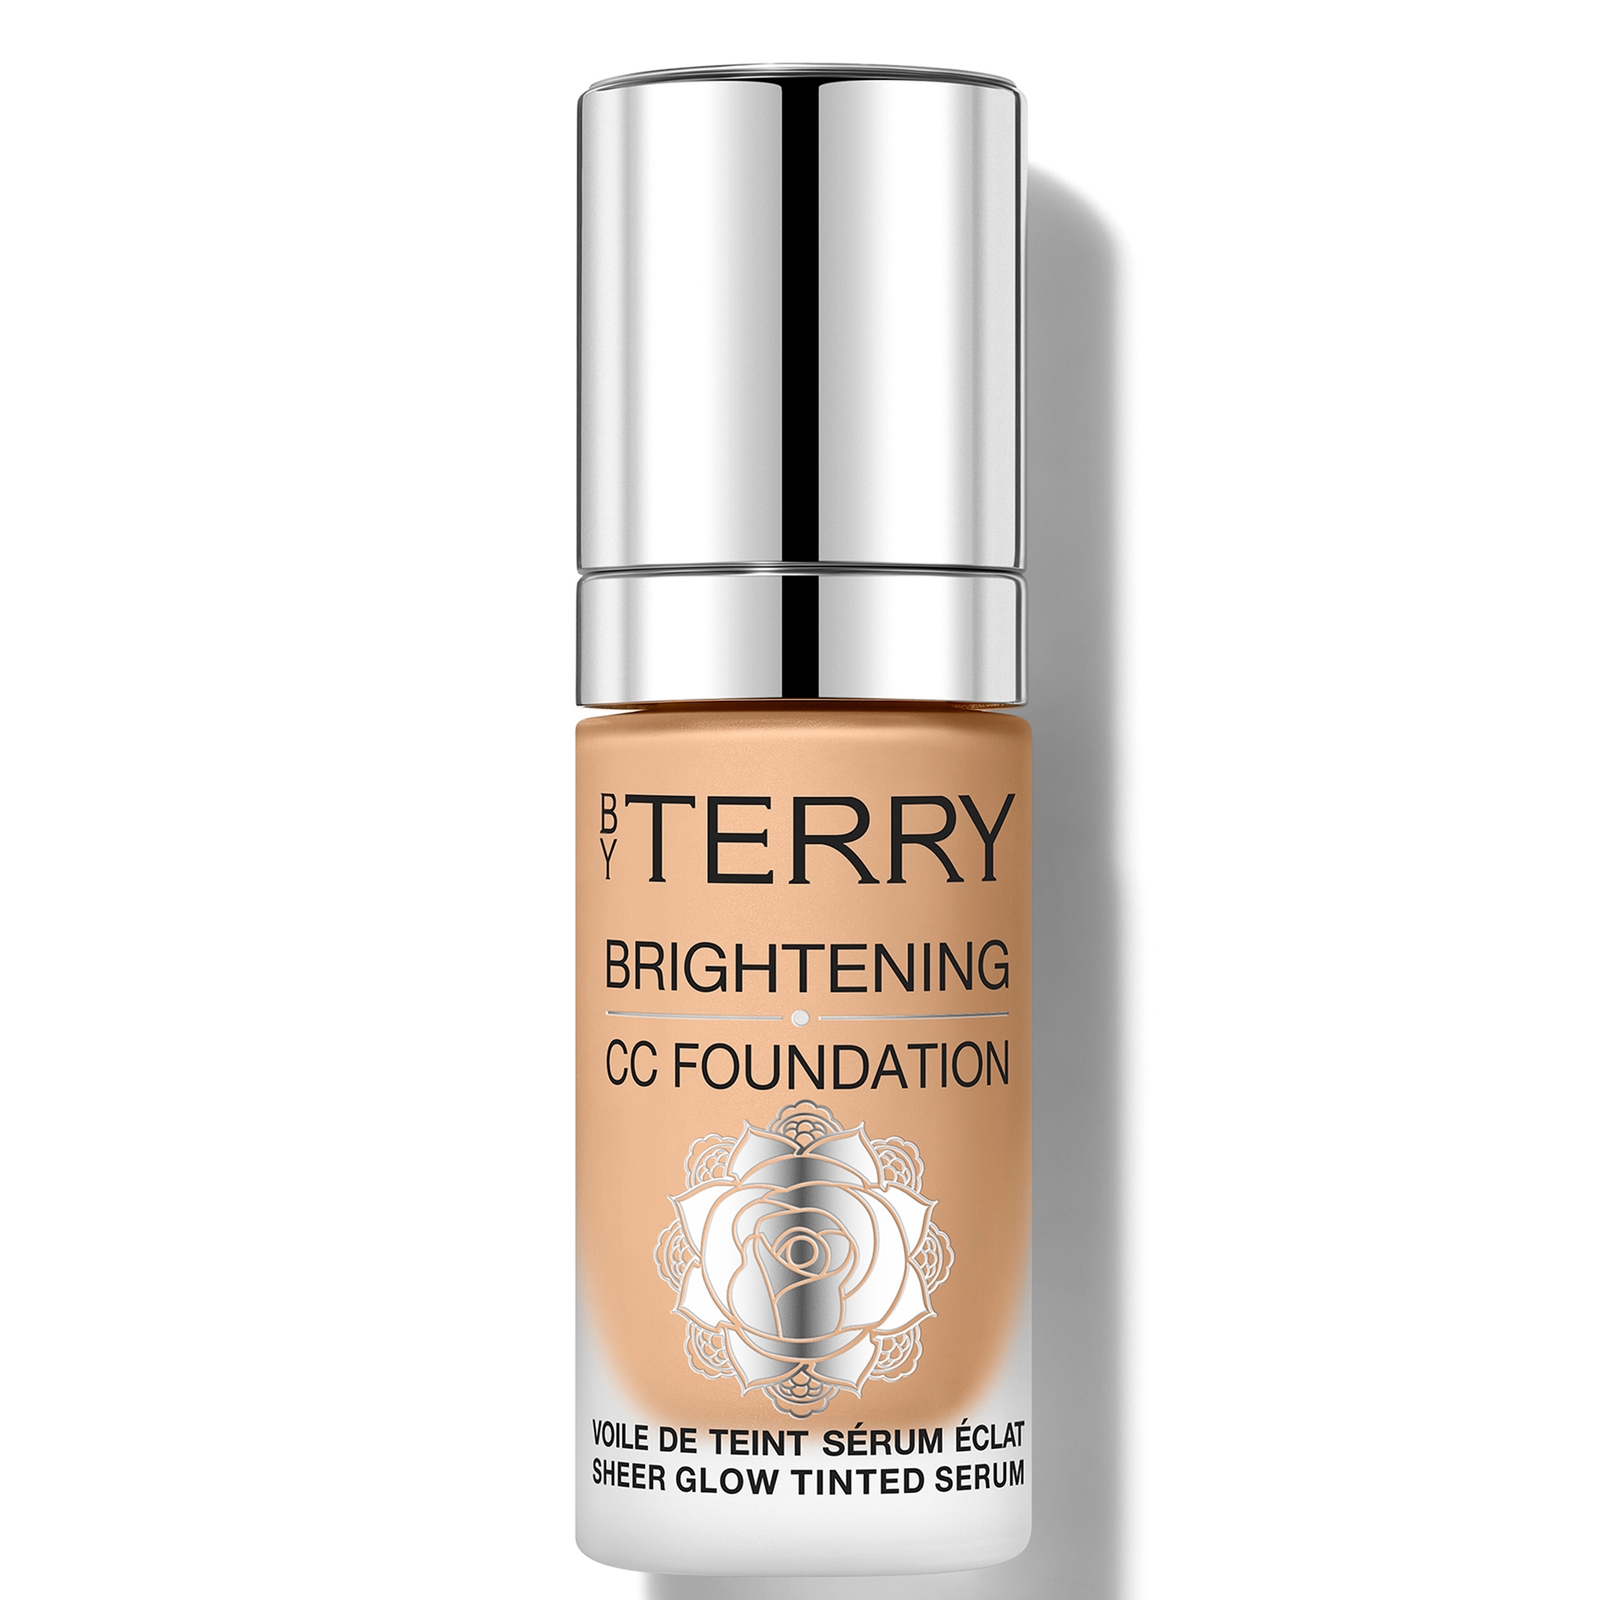 Image of By Terry Brightening CC Foundation 30ml (Various Shades) - 6N - TAN NEUTRAL